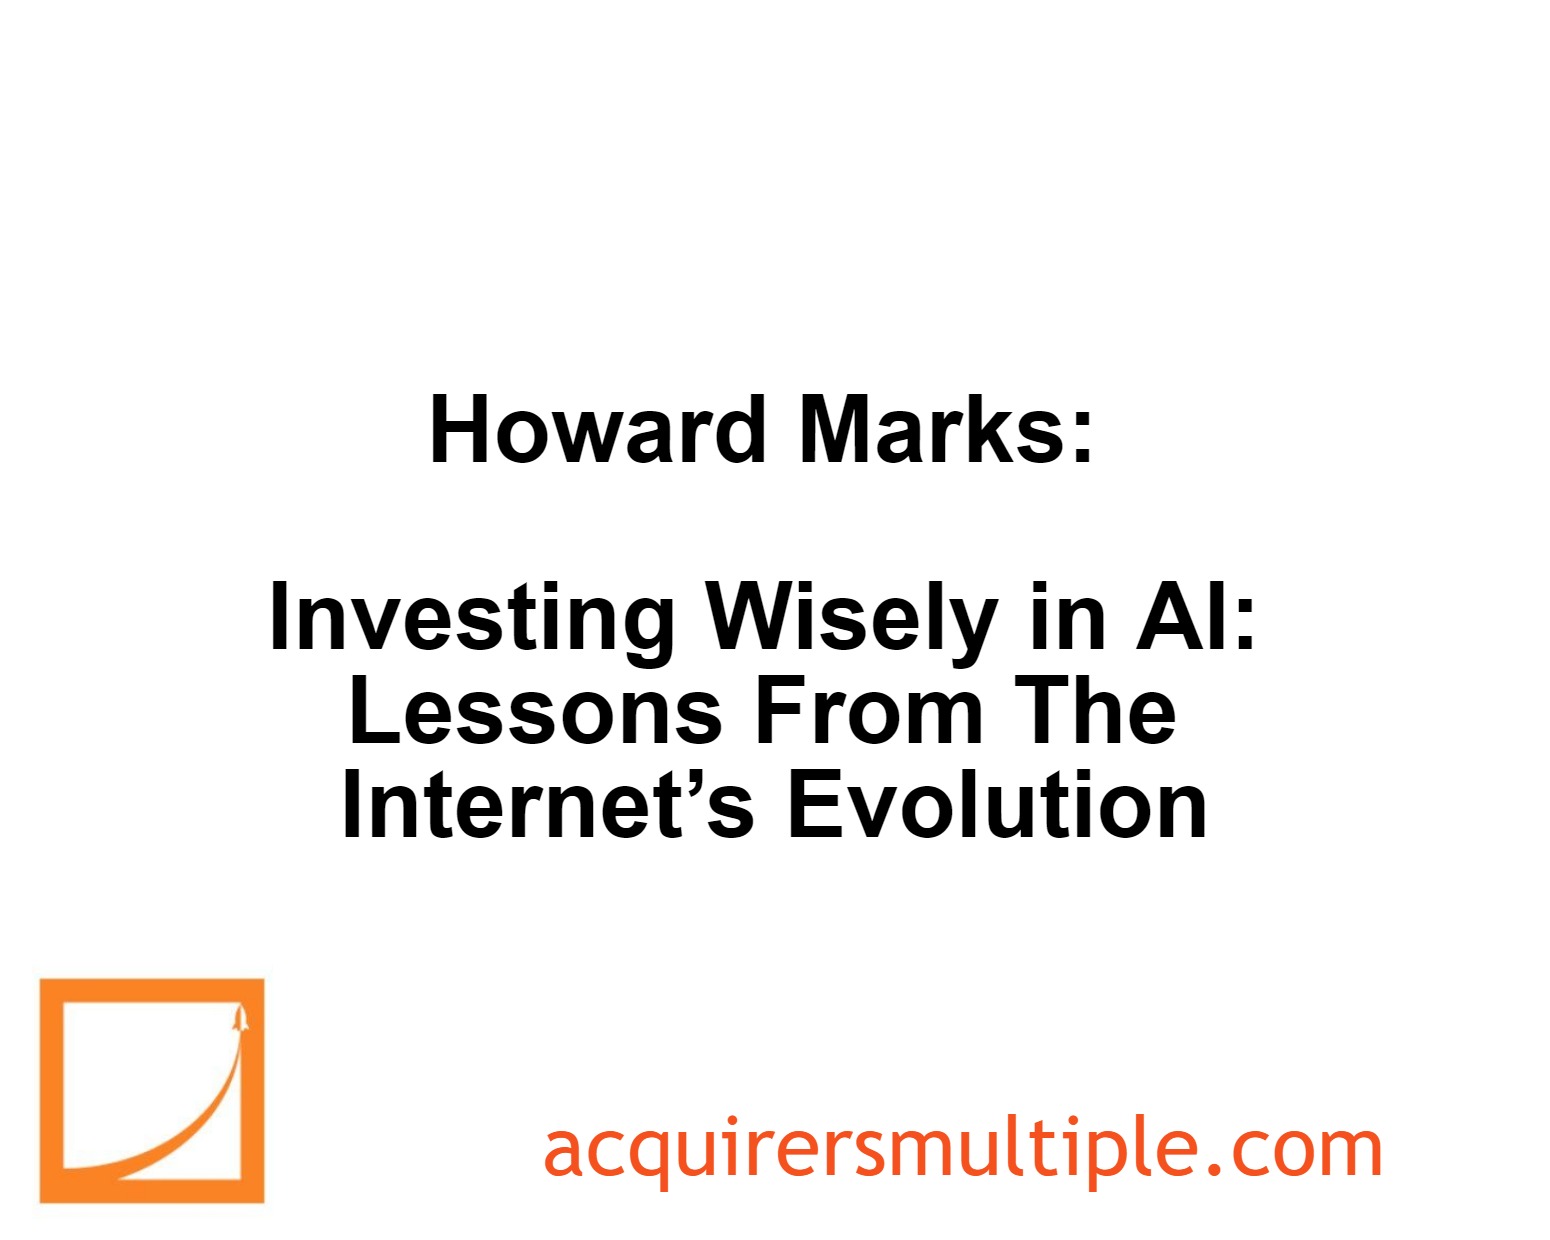 Howard Marks: Investing Wisely in AI: Lessons From The Internet’s Evolution